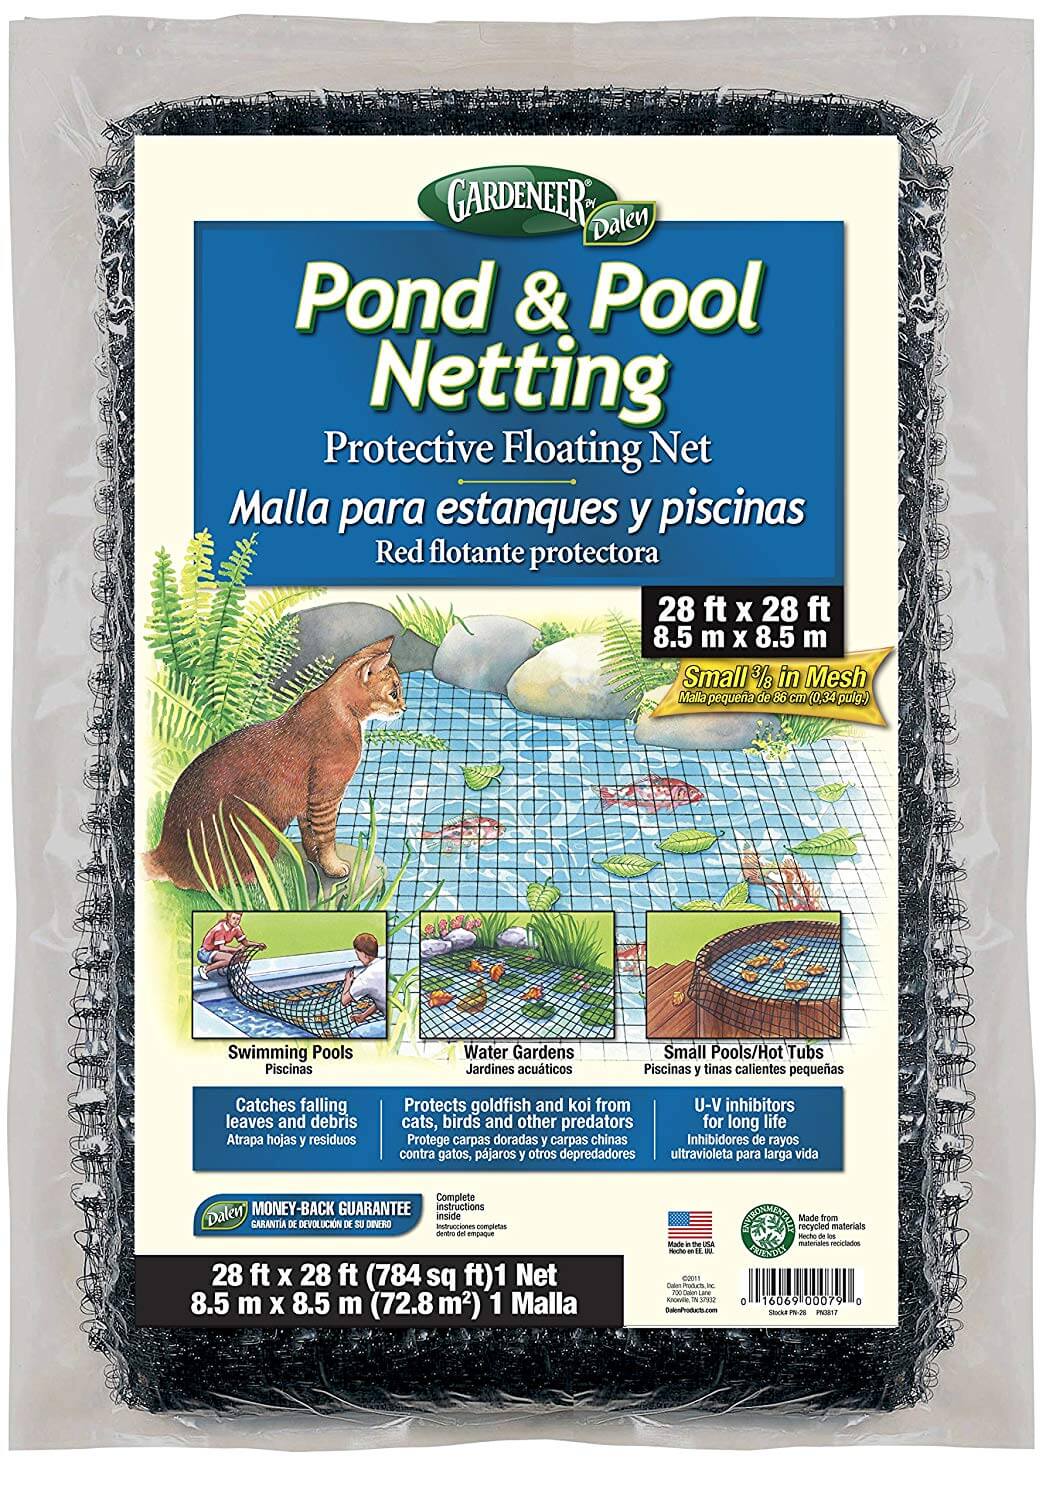 Extra Large Pond and Pool Netting is perfect for garden ponds, waterfalls,  pond-less waterfalls, fountains, fish ponds, and koi ponds